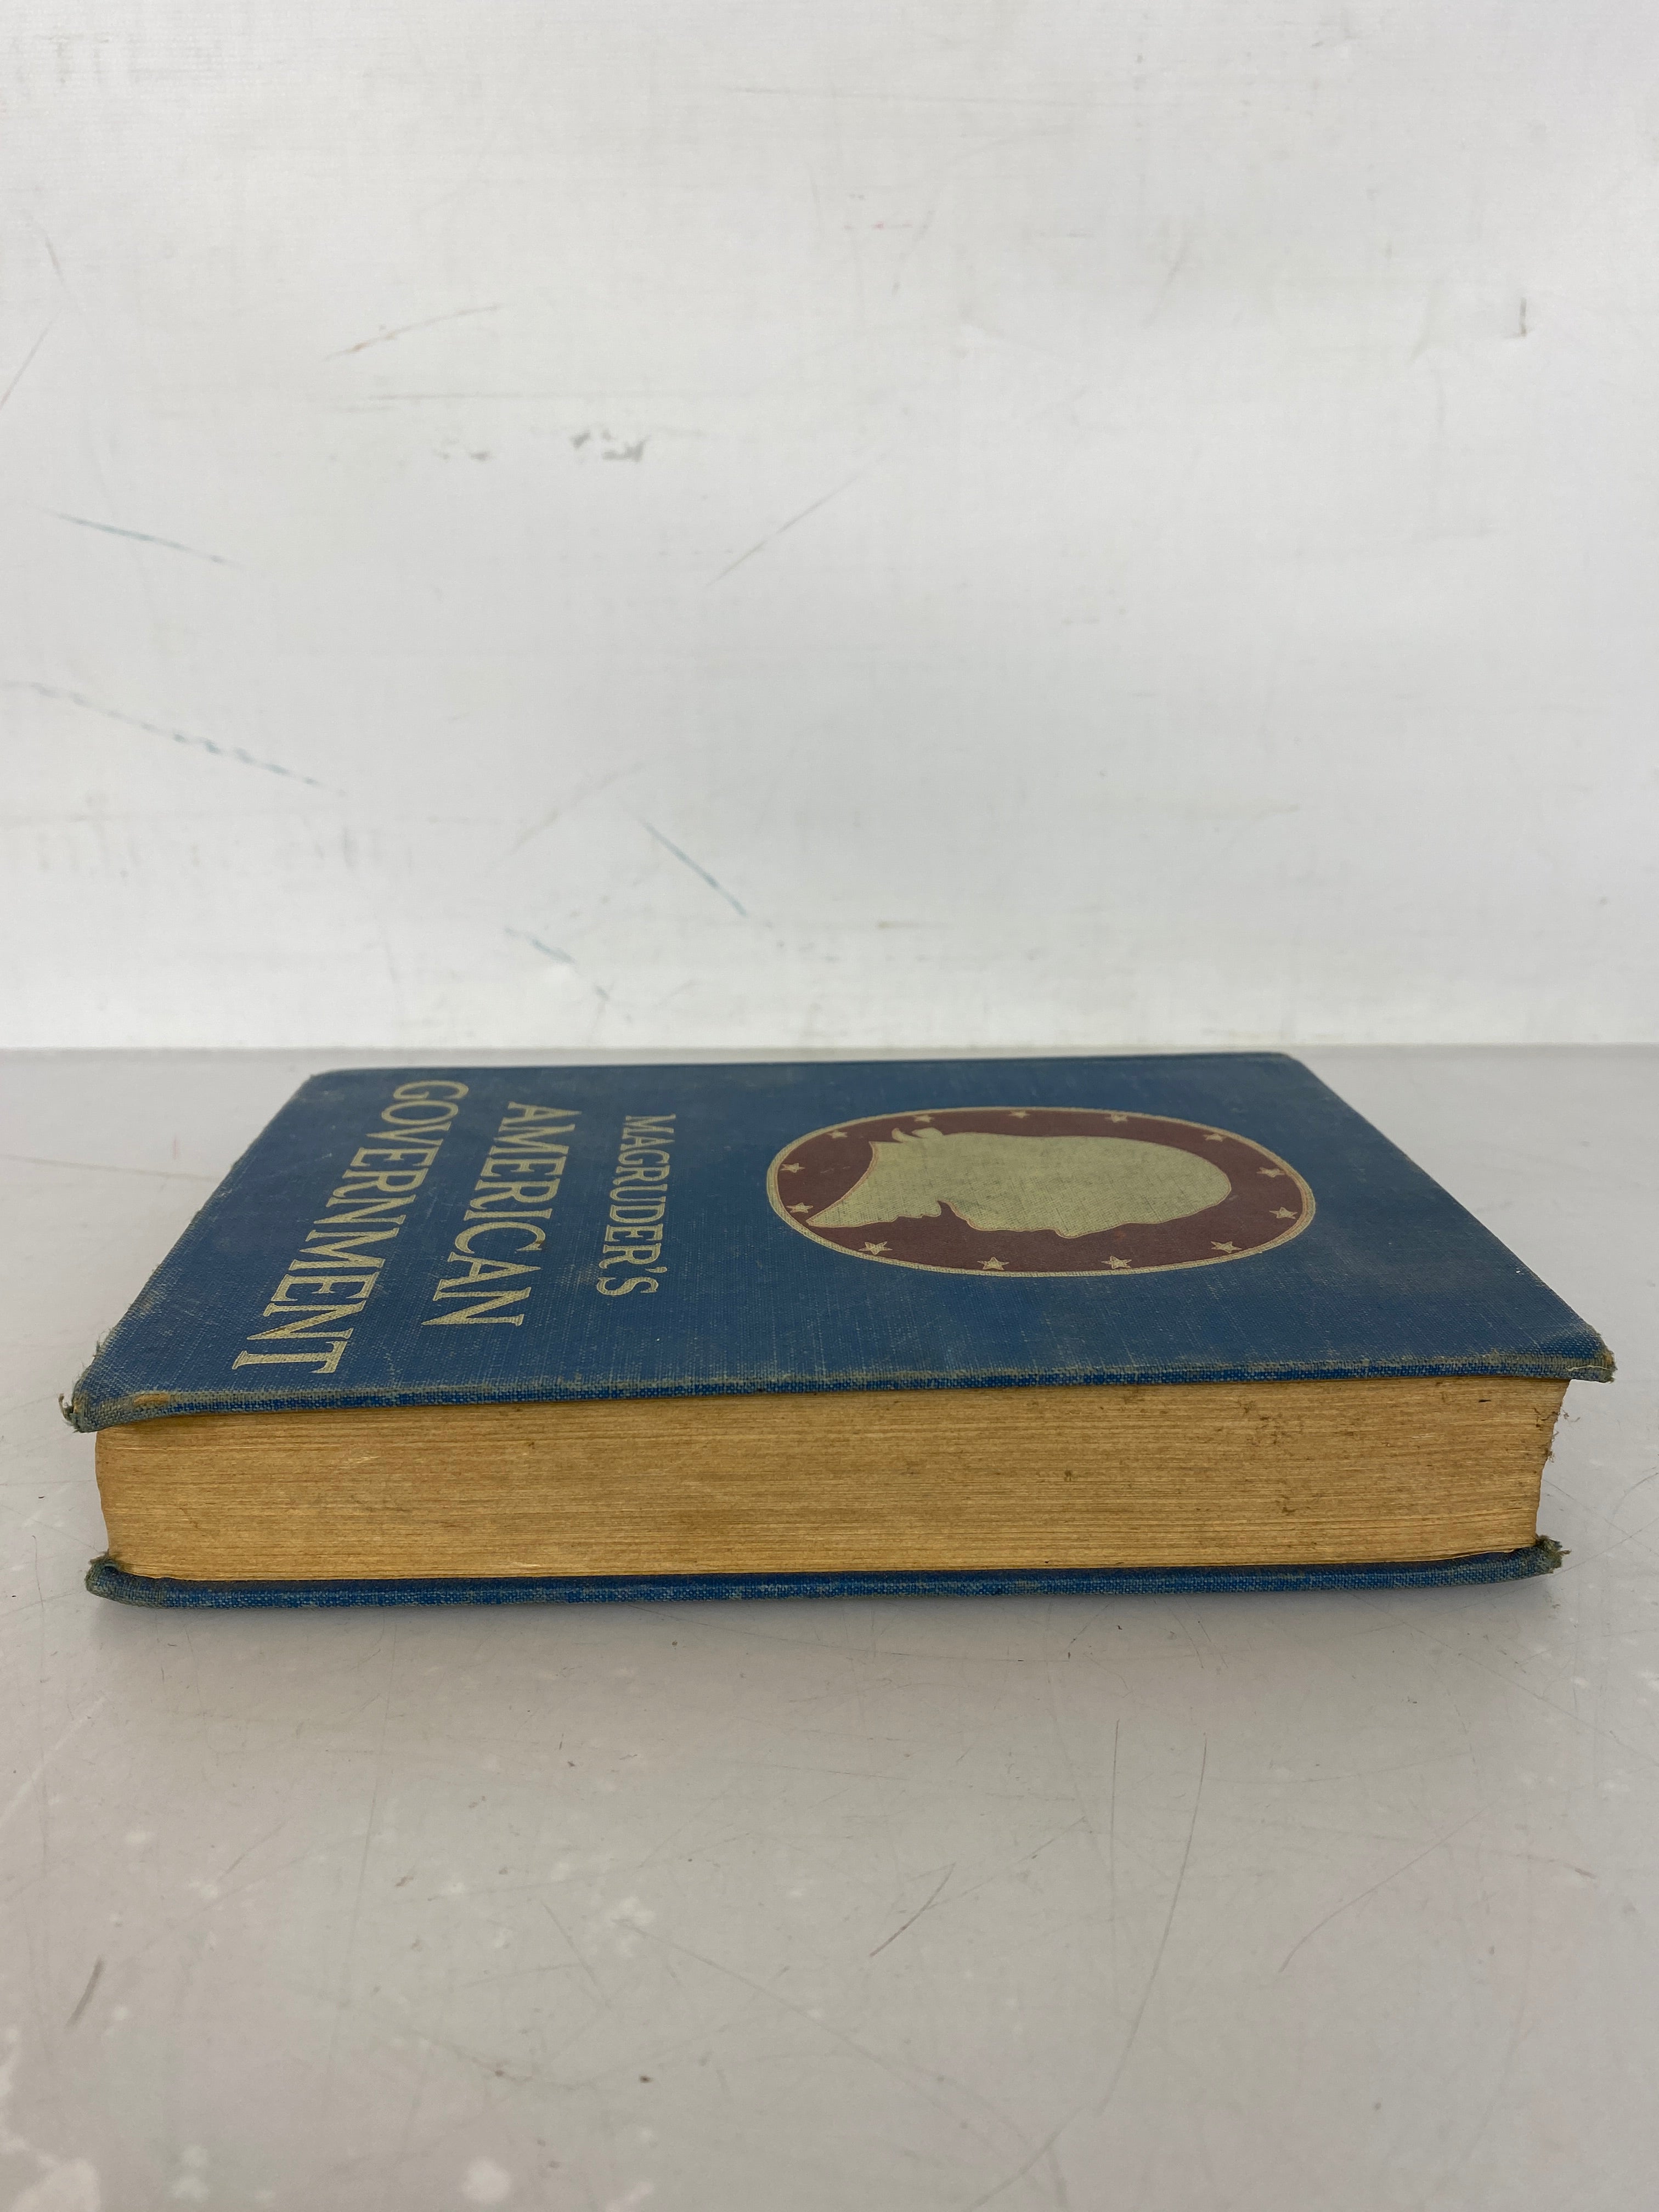 Magruder's American Government 1953 Edition HC